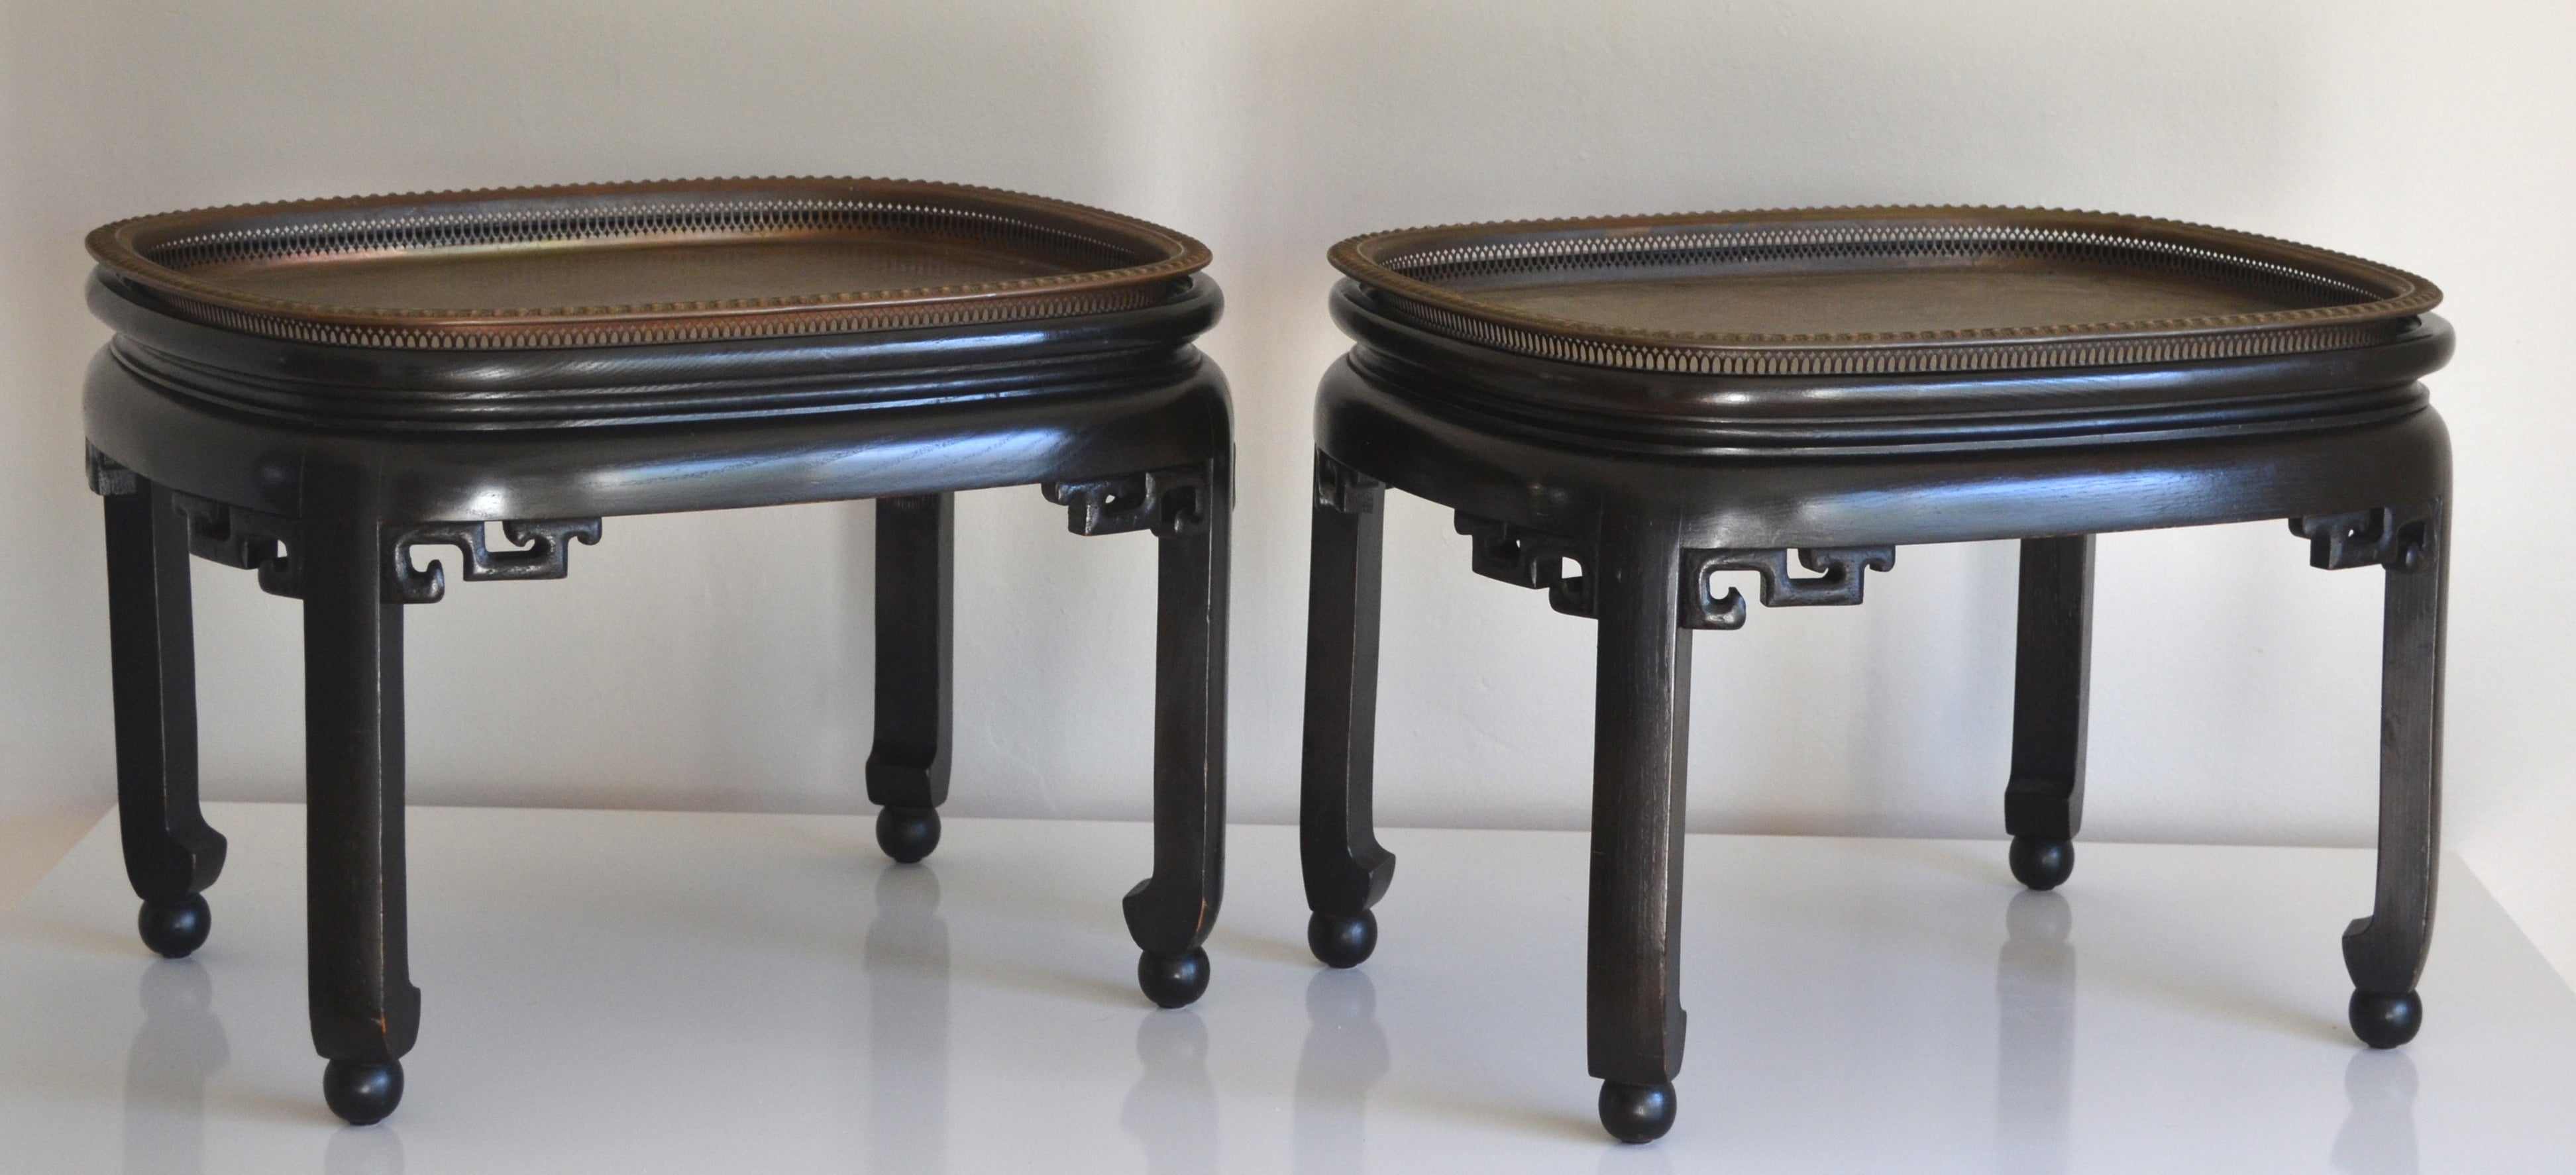 Pair of Ebonized Wood and Brass Tray Coffee Tables